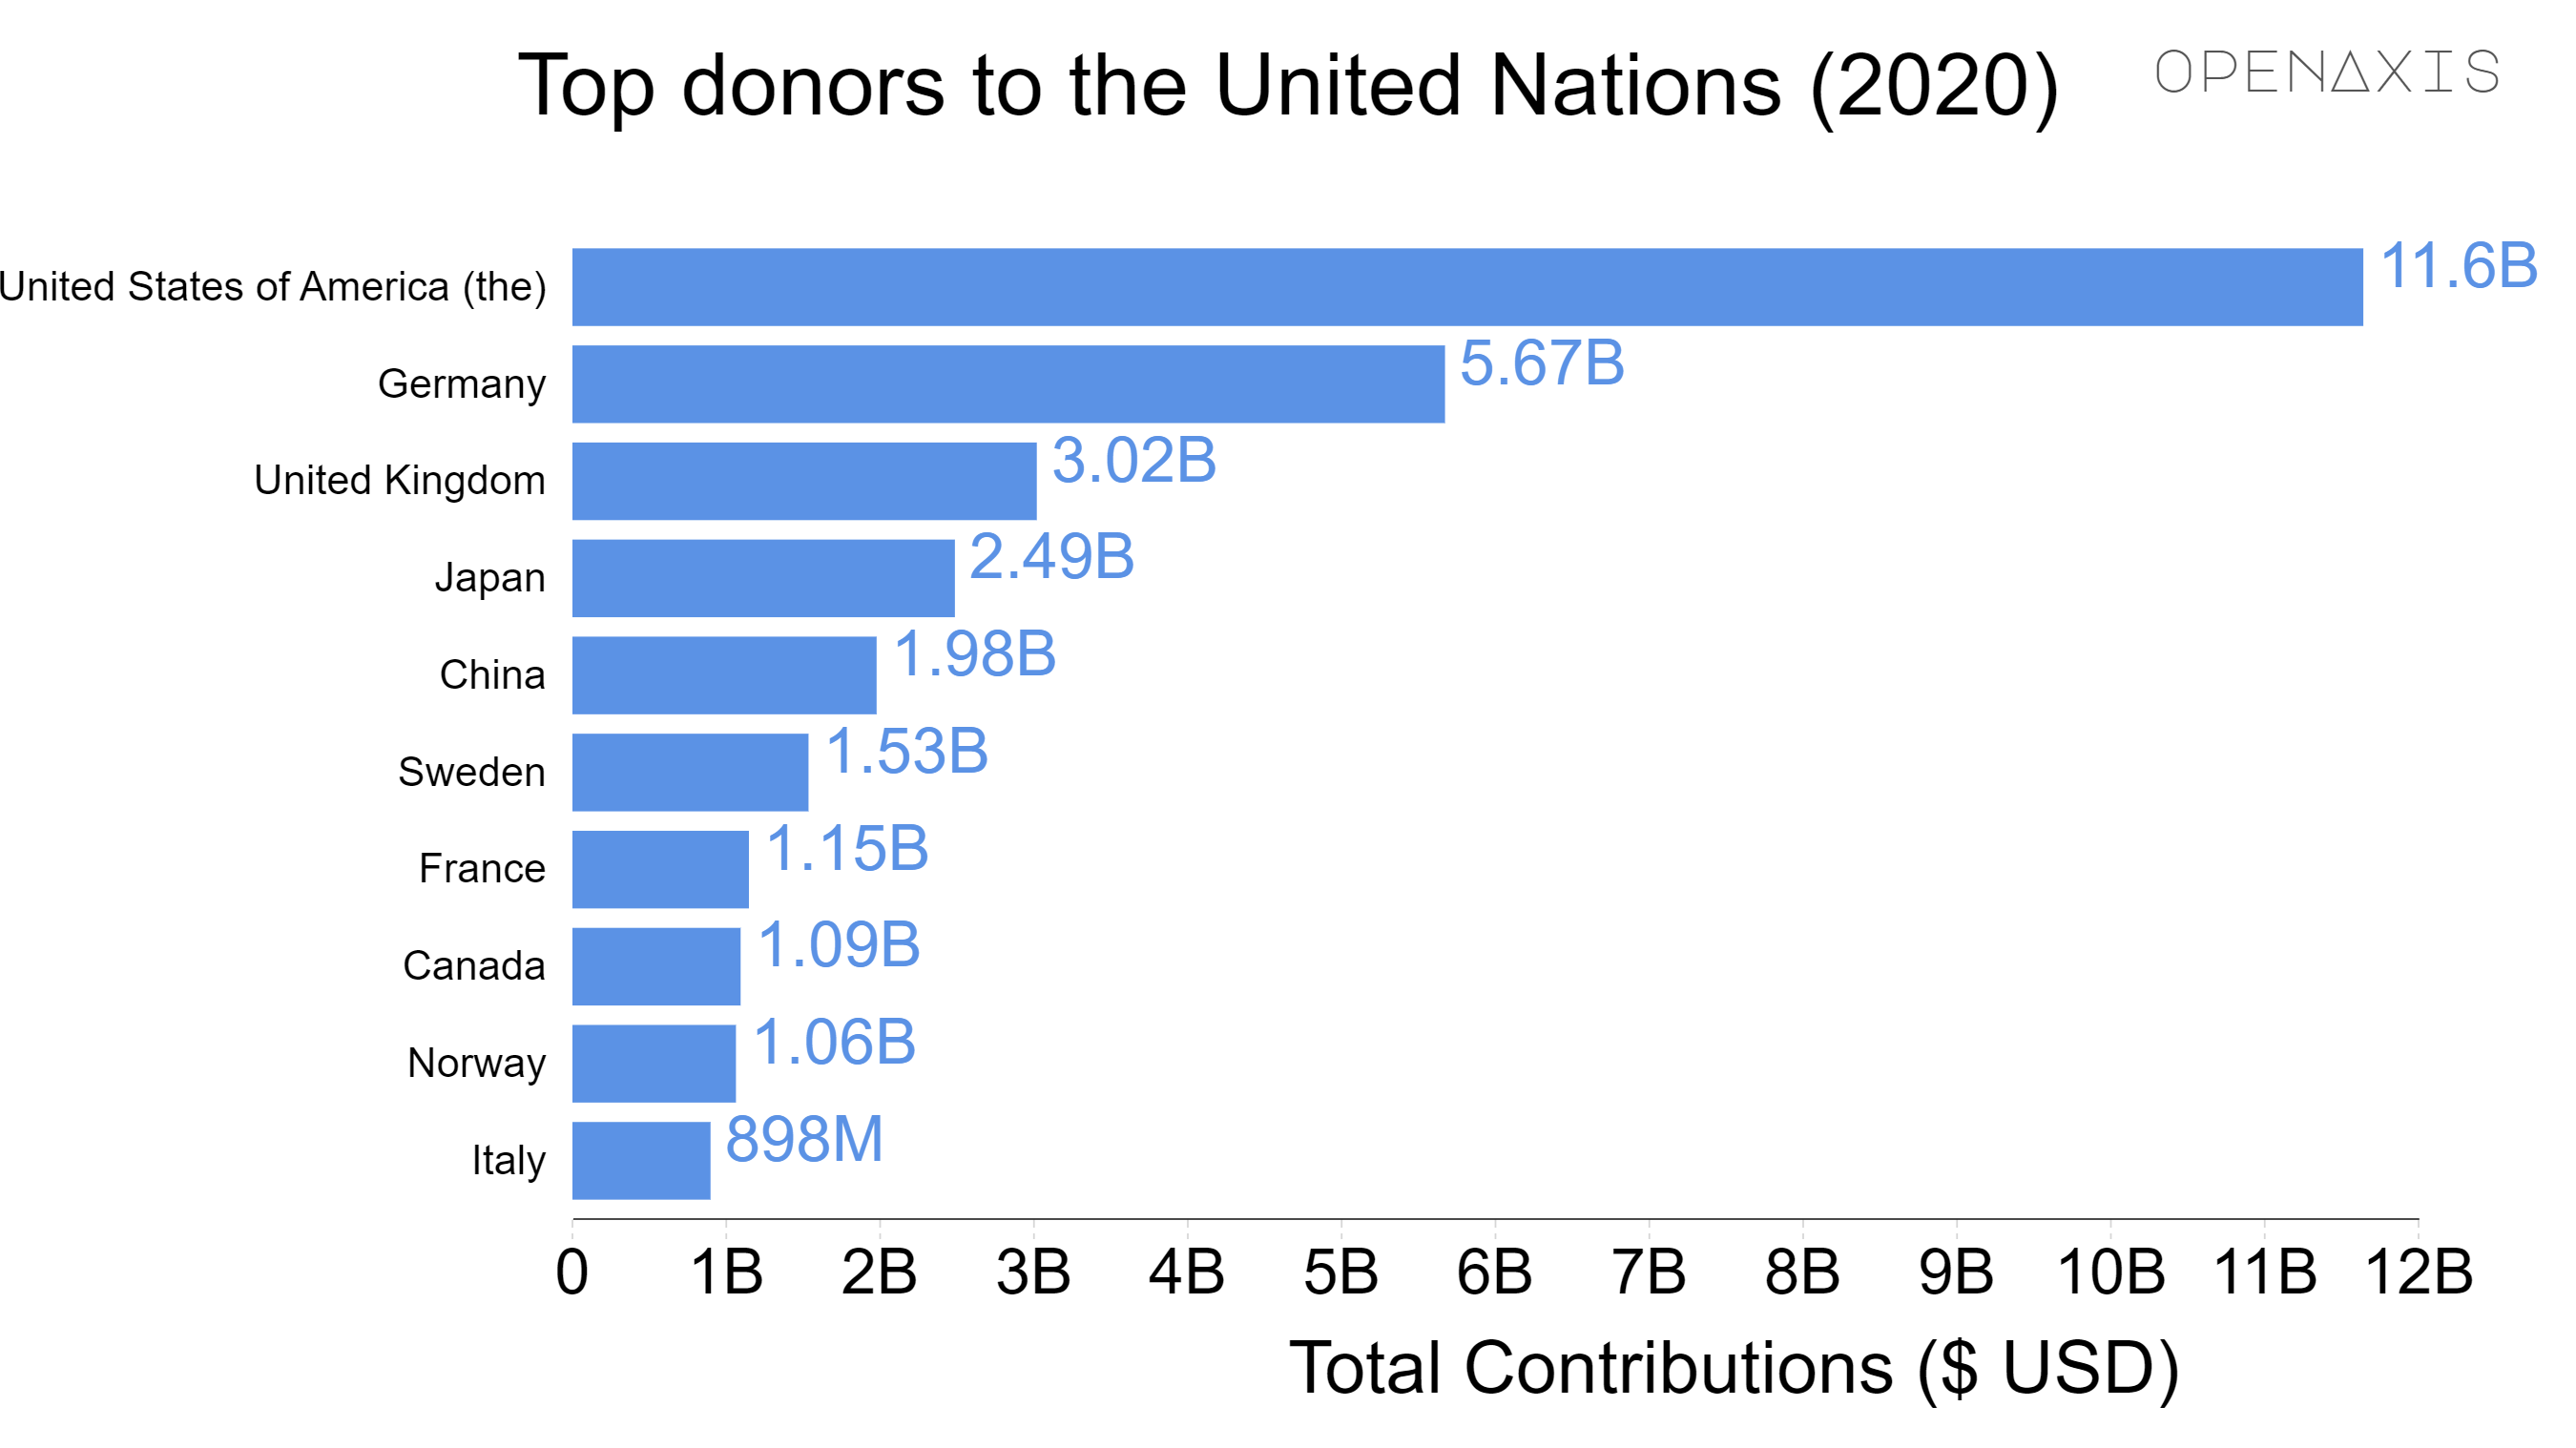 "Top donors to the United Nations (2020)"